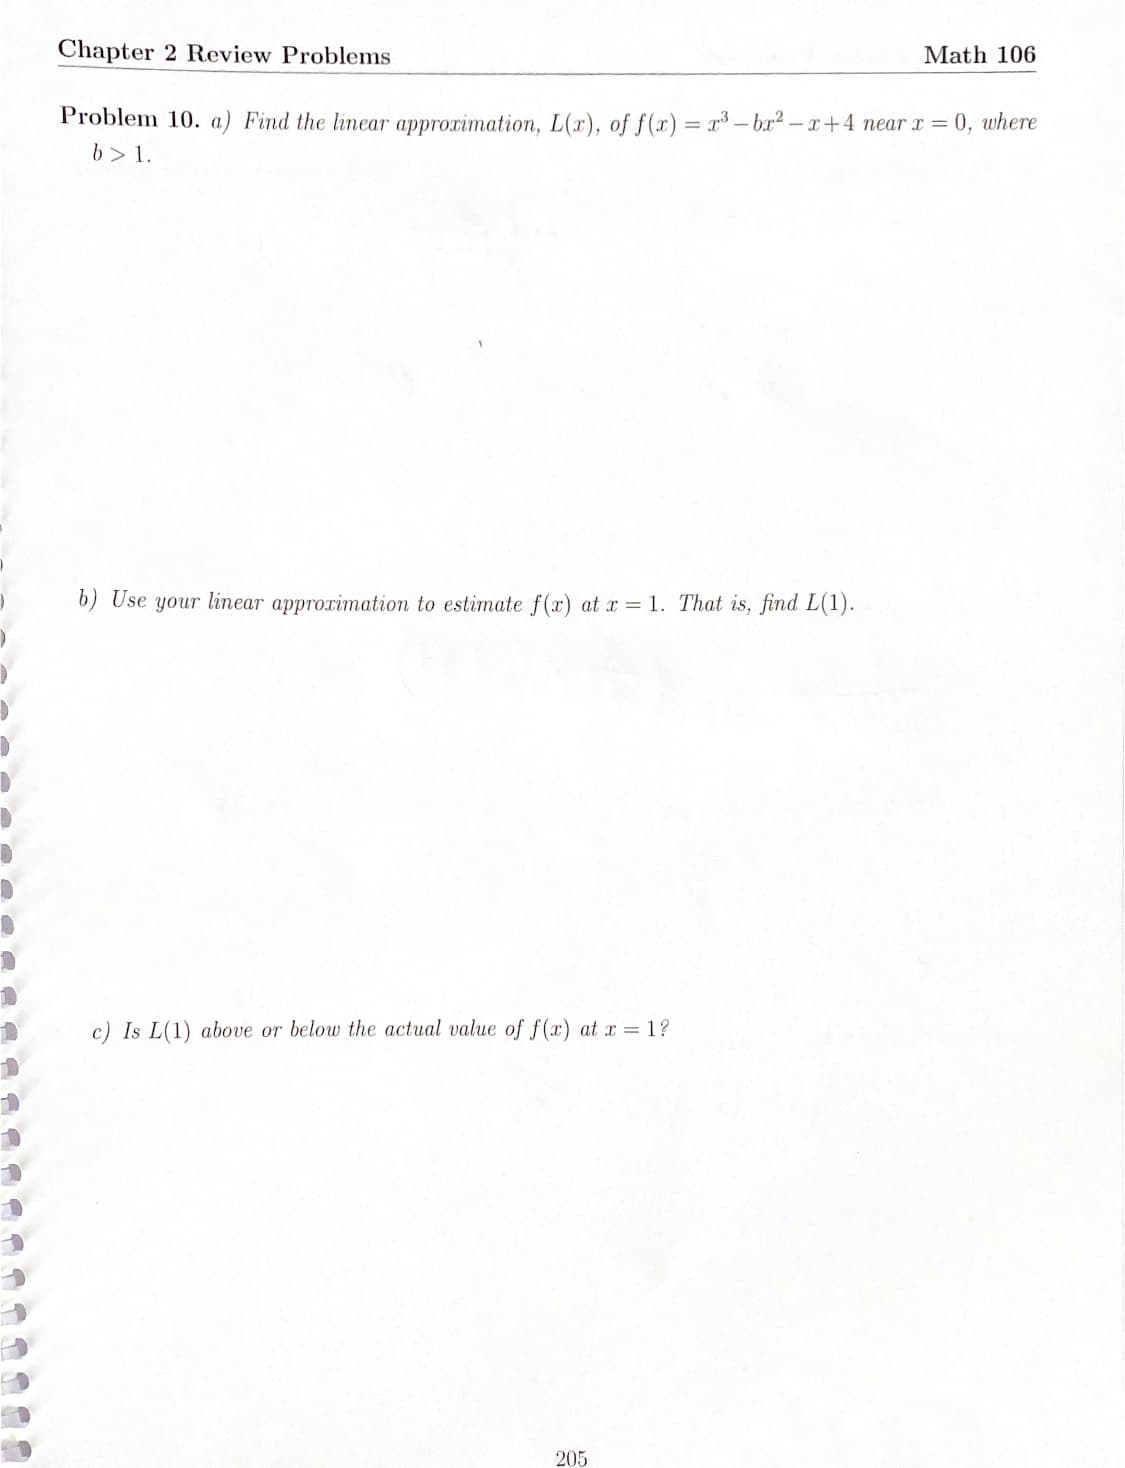 Chapter 2 Review Problems
Math 106
Problem 10. a) Find the linear approximation, L(x), of f(r)= x³ - bx2-x+4 near x = 0, where
b> 1.
6) Use your linear approximation to estimate f(x) at x = 1. That is, find L(1).
c) Is L(1) above or below the actual value of f(x) at x = 1?
205
